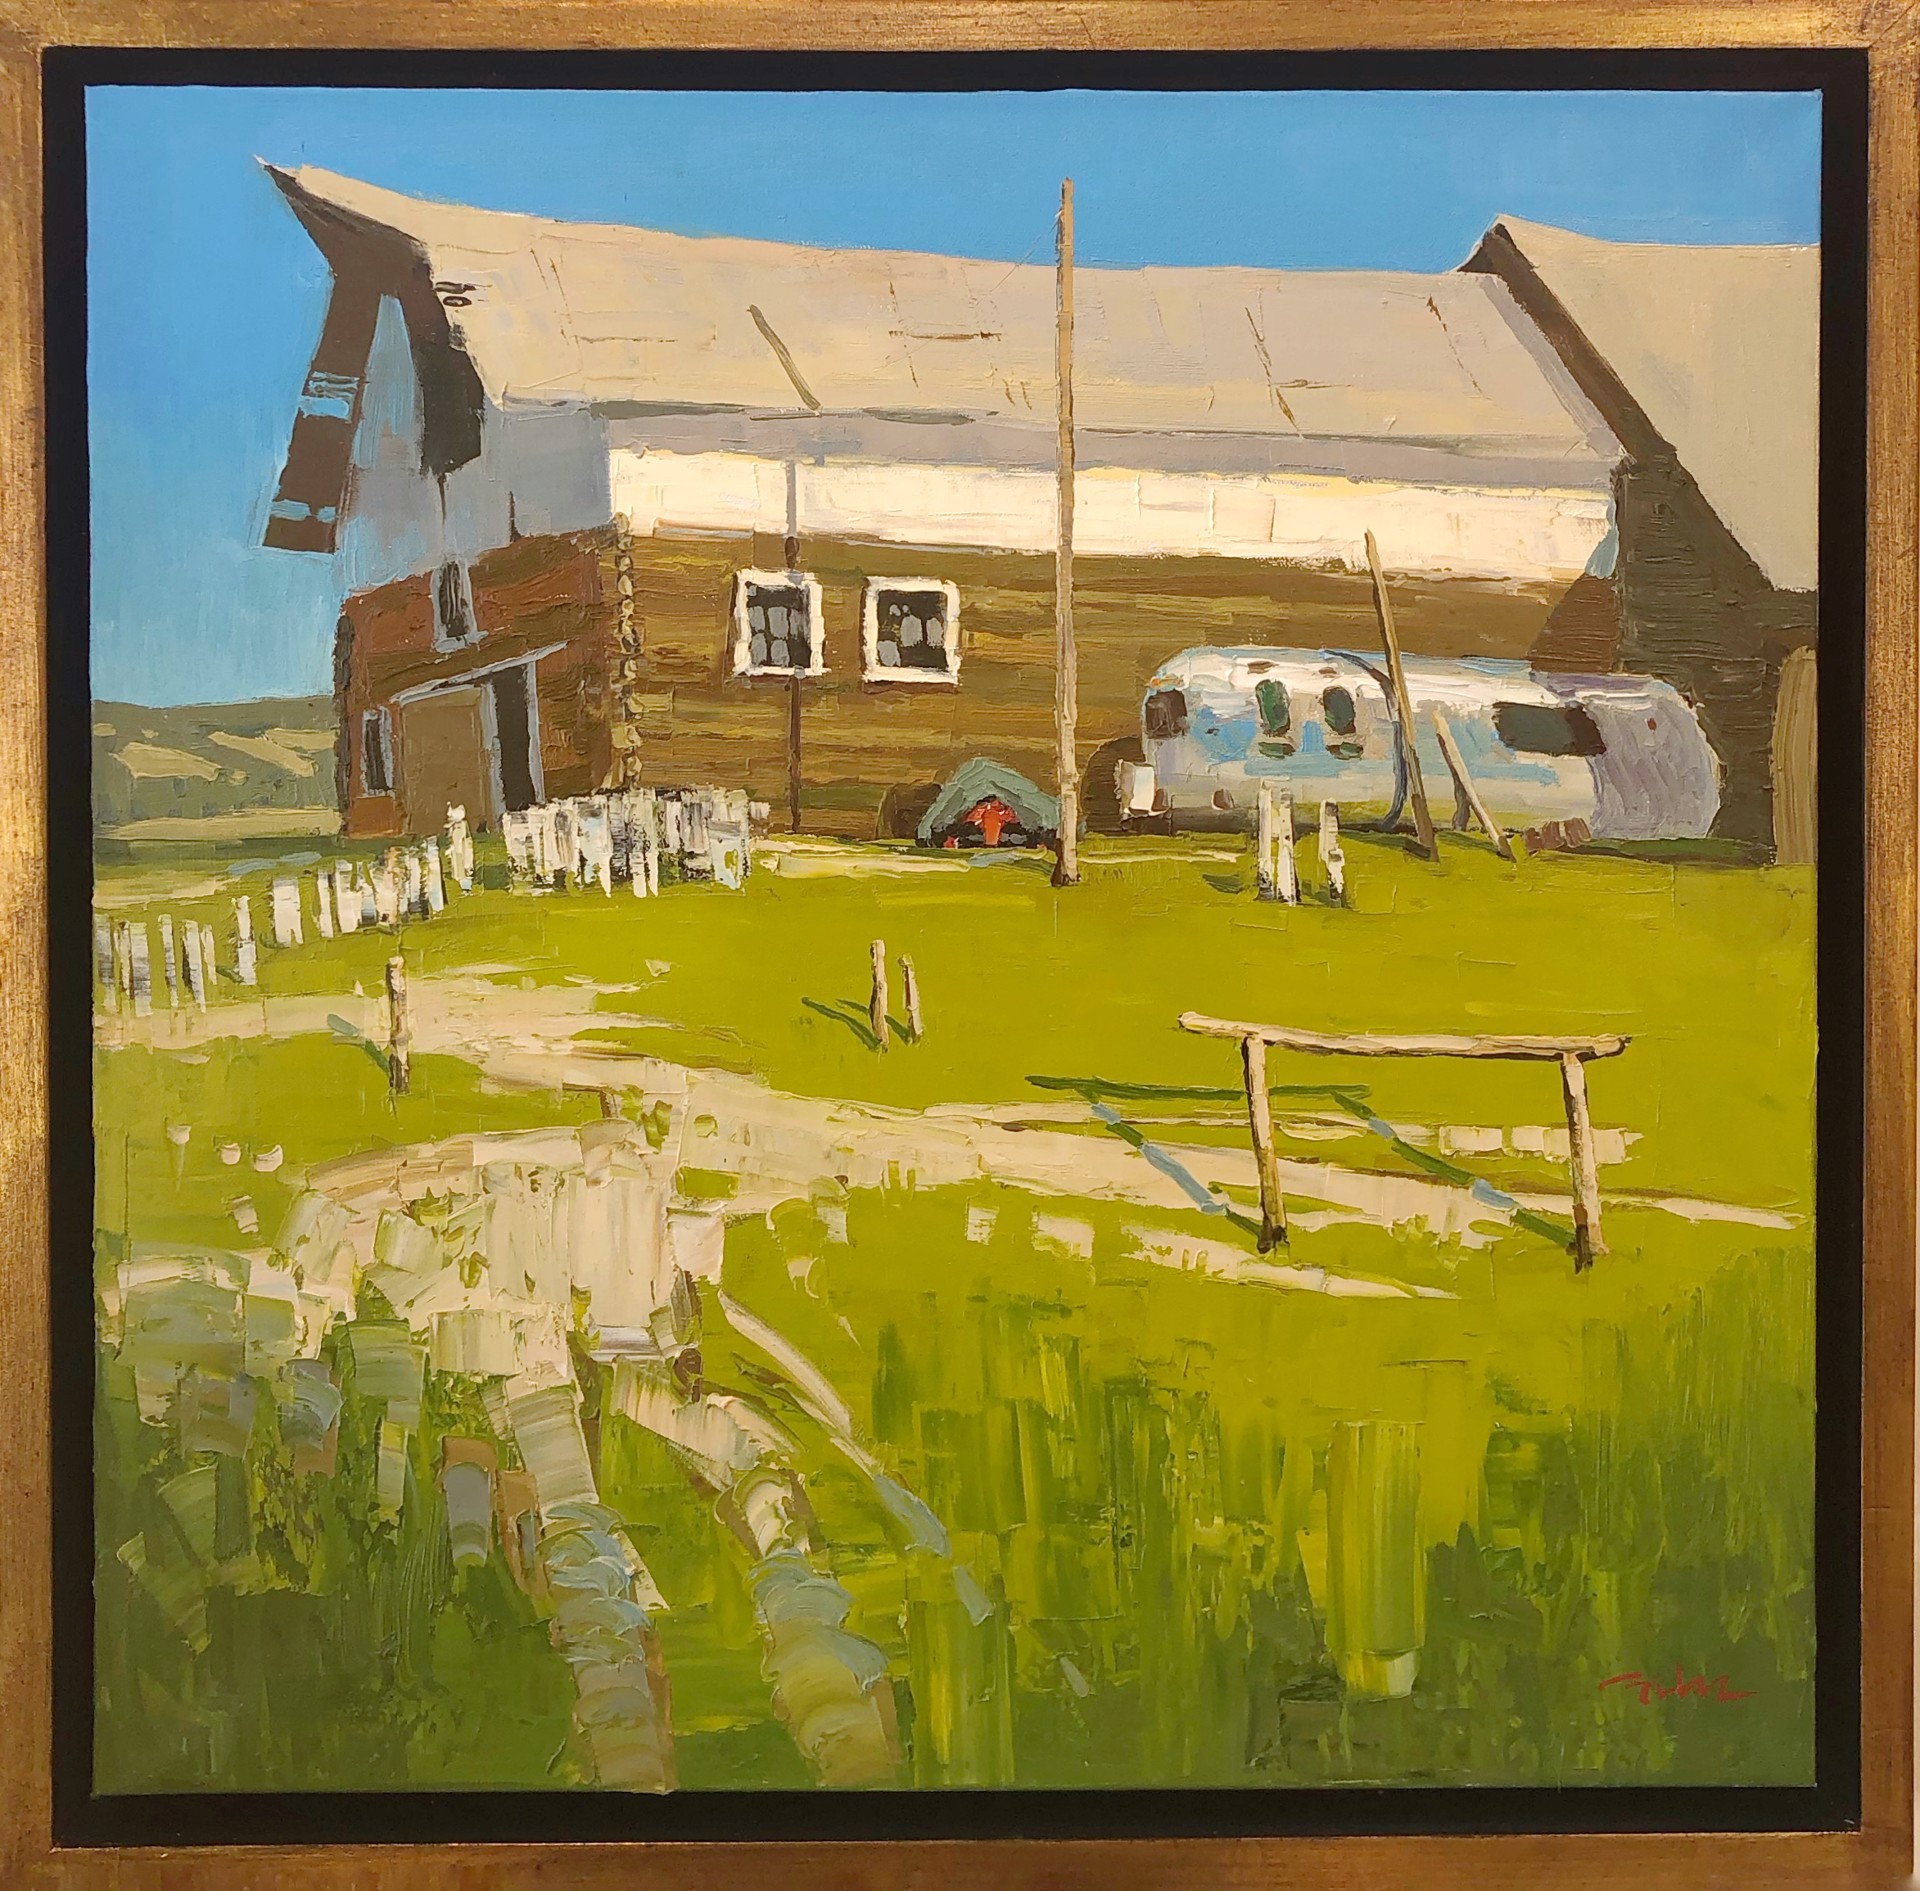 Original Oil Painting Of An Airstream Camper Trailer Parked Next To A Barn Surrounded By The Field, By Silas Thompson, Available At Gallery Wild